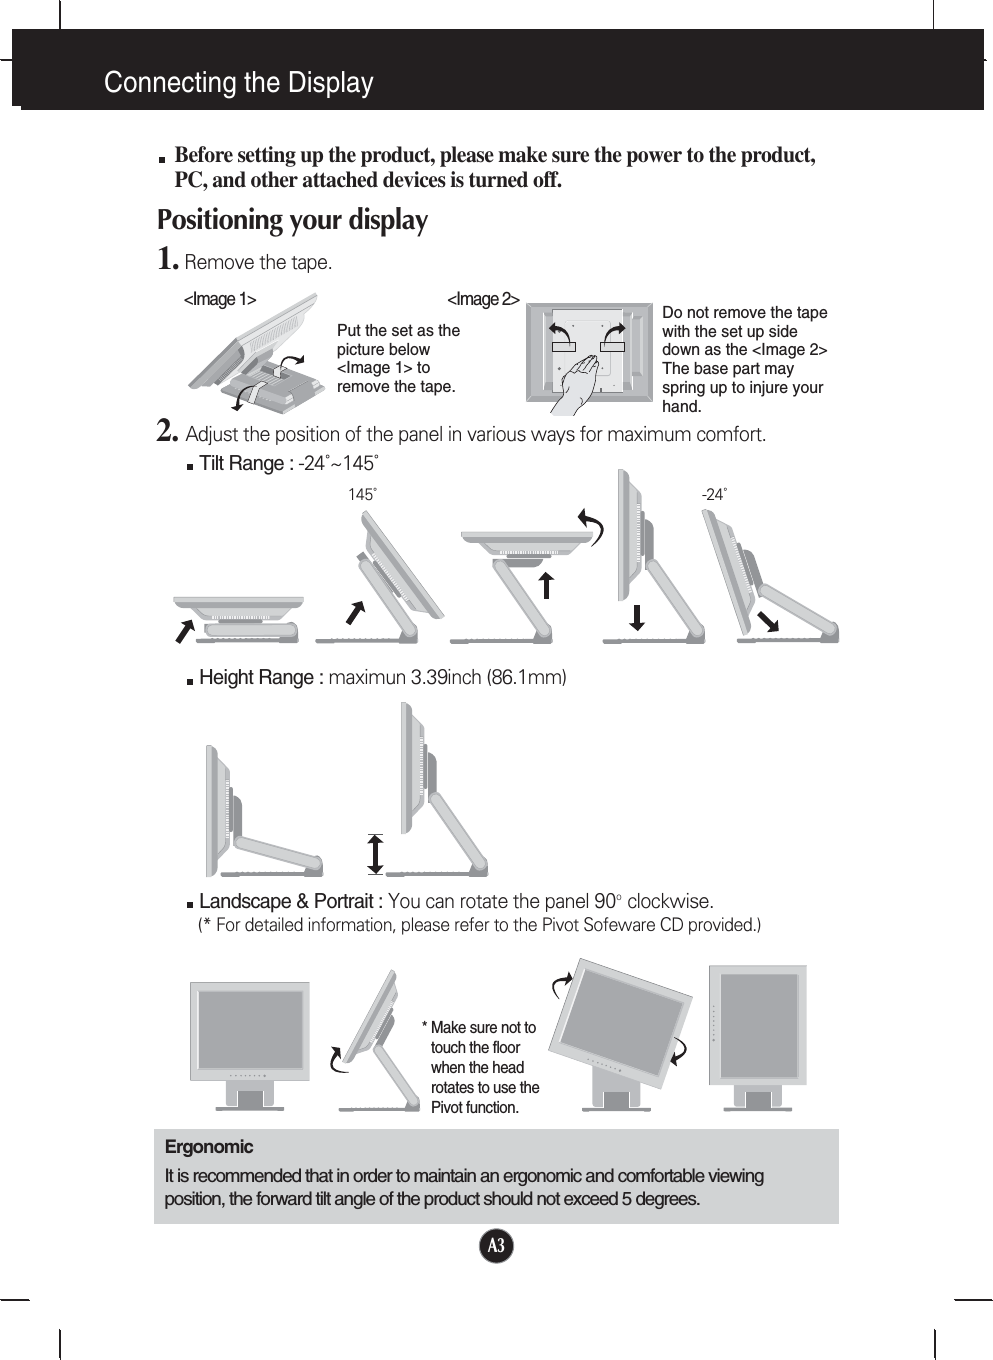 A3Connecting the DisplayBefore setting up the product, please make sure the power to the product,PC, and other attached devices is turned off. Positioning your display1. Remove the tape.ErgonomicIt is recommended that in order to maintain an ergonomic and comfortable viewingposition, the forward tilt angle of the product should not exceed 5 degrees.Height Range : maximun 3.39inch (86.1mm)Landscape &amp; Portrait : You can rotate the panel 90o  clockwise. (* For detailed information, please refer to the Pivot Sofeware CD provided.)2. Adjust the position of the panel in various ways for maximum comfort.Tilt Range : -24˚~145˚145˚-24˚* Make sure not totouch the floorwhen the headrotates to use thePivot function.&lt;Image 1&gt;Put the set as thepicture below&lt;Image 1&gt; toremove the tape. Do not remove the tapewith the set up sidedown as the &lt;Image 2&gt;The base part mayspring up to injure yourhand. &lt;Image 2&gt;